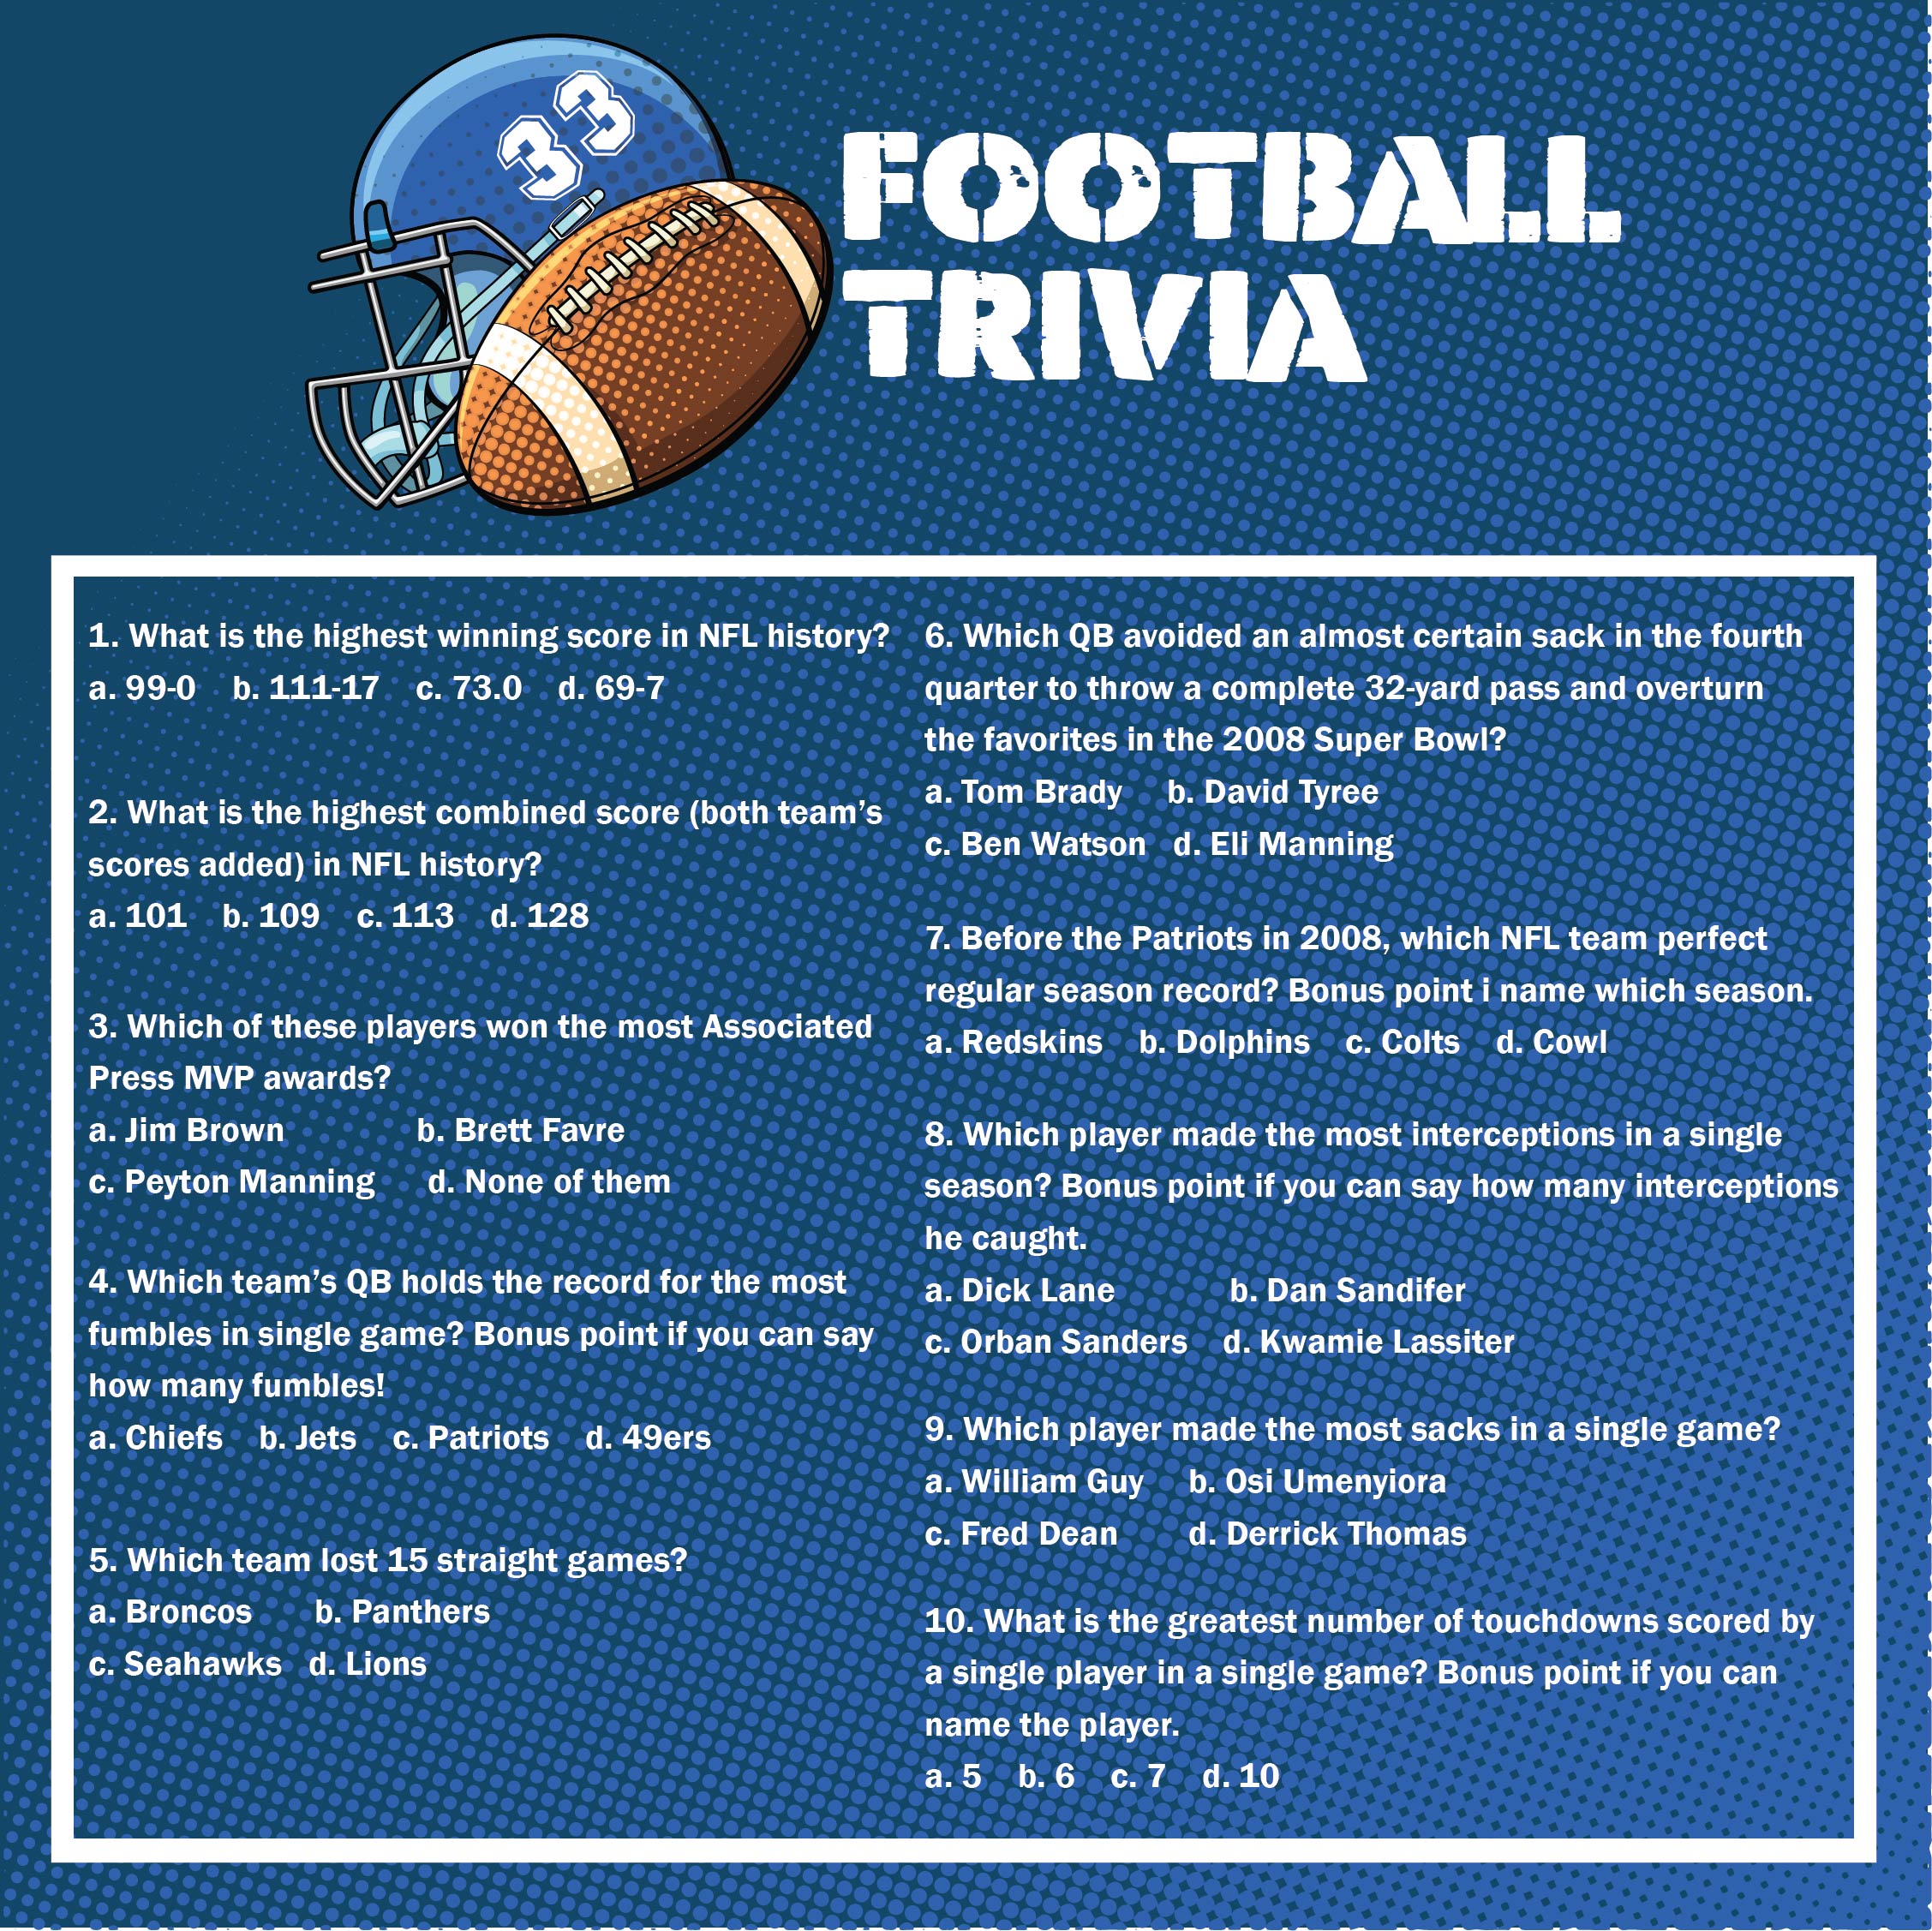 Football Trivia Questions and Answers